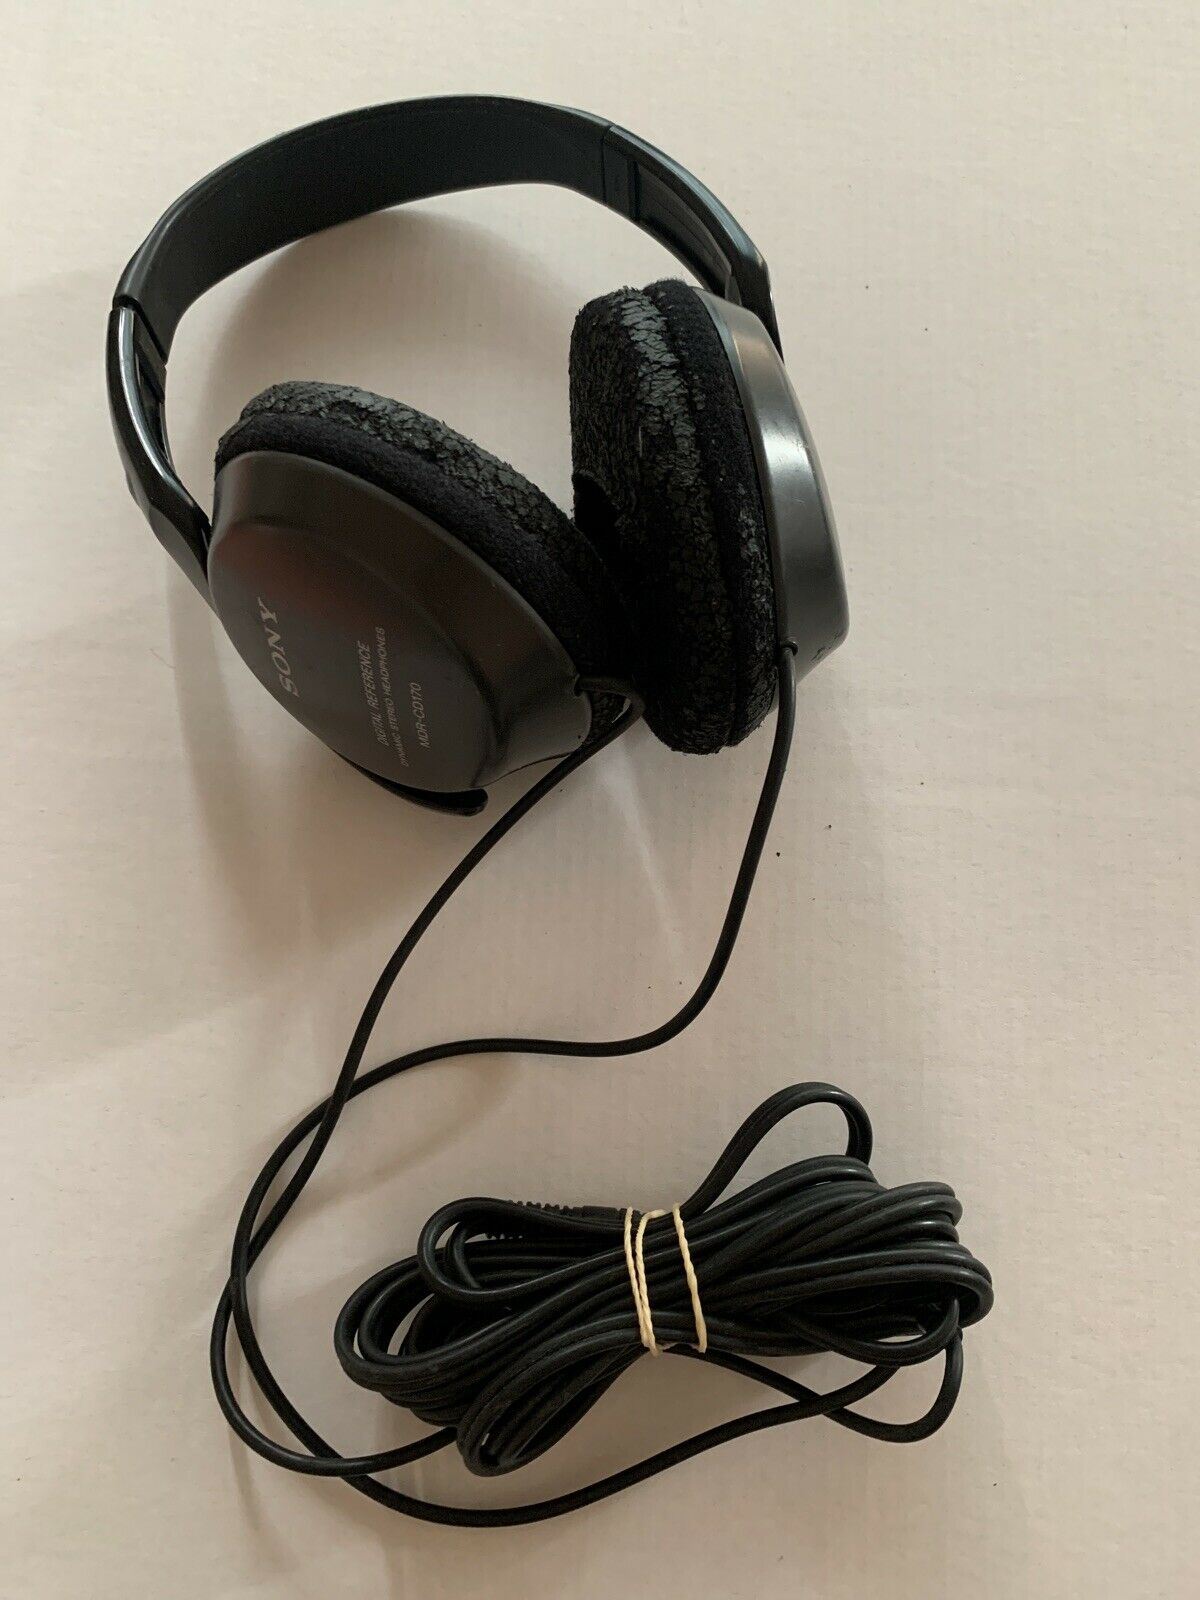 Sony MDR-CD170 Digital Reference Headphones - Working but Damage On Wire